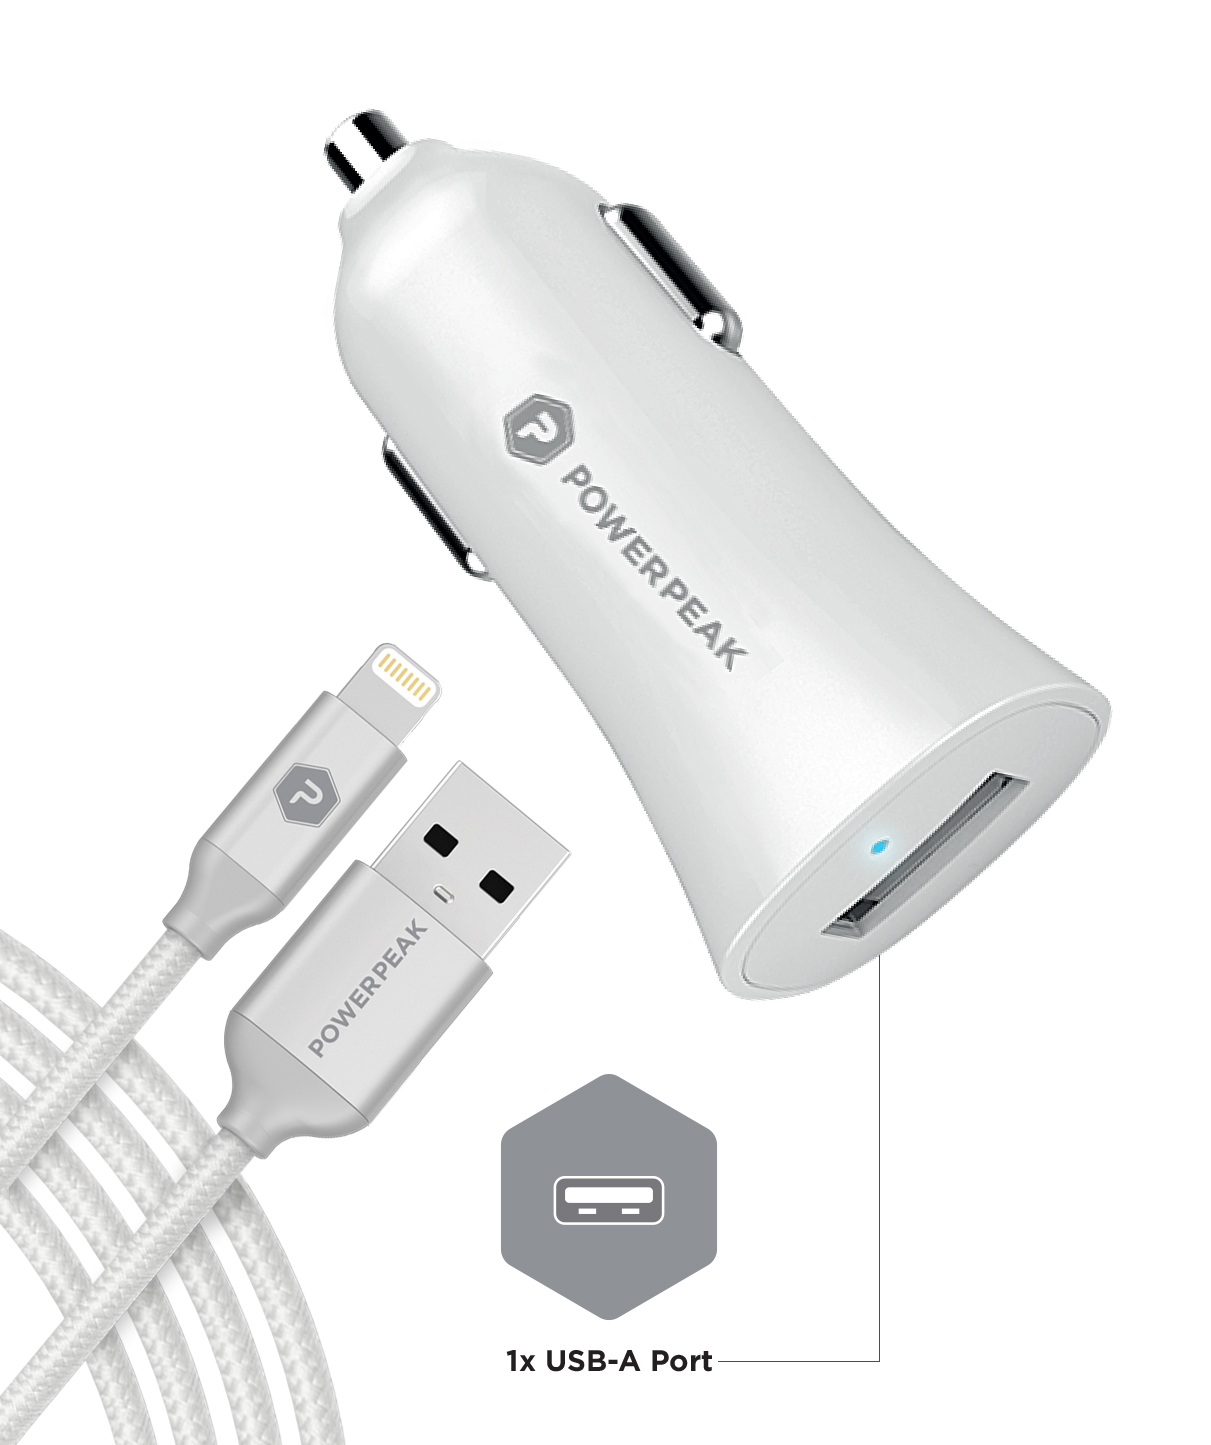 PowerPeak Rapid Vehicle Charger with 4ft Braided Lightning Charge & Sync Cable - White (2.4 Amps)